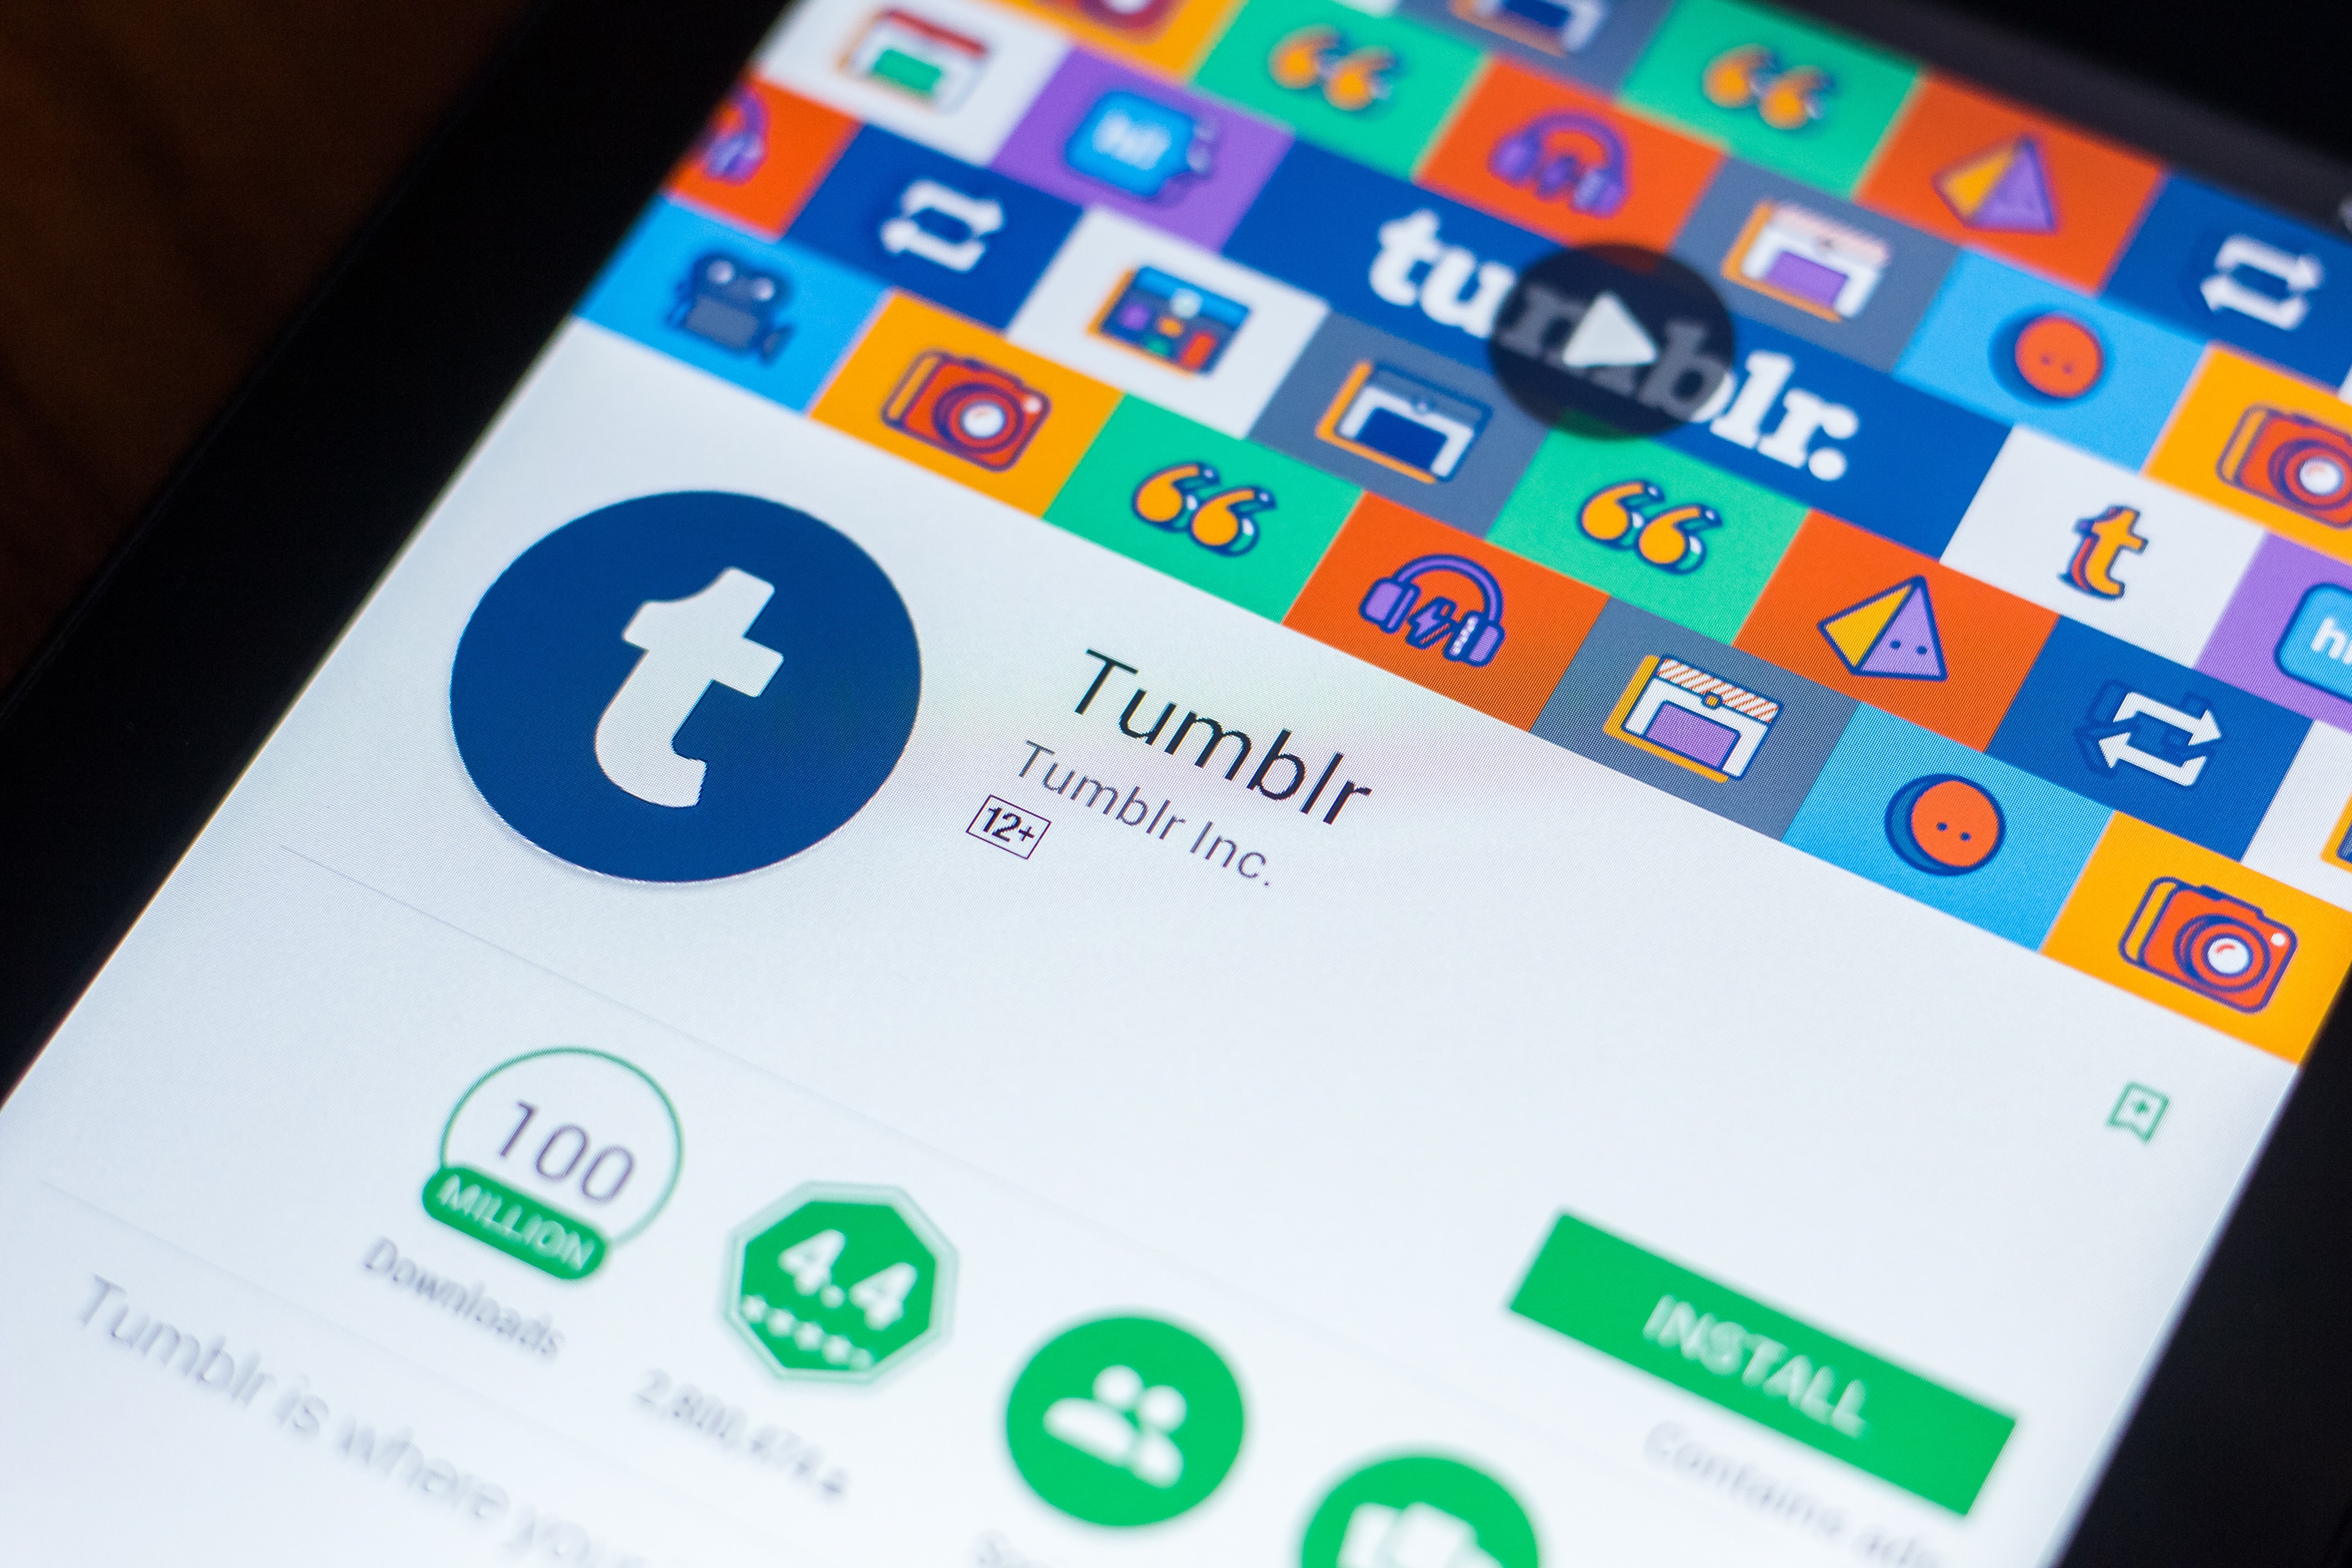 How to Use Tumblr